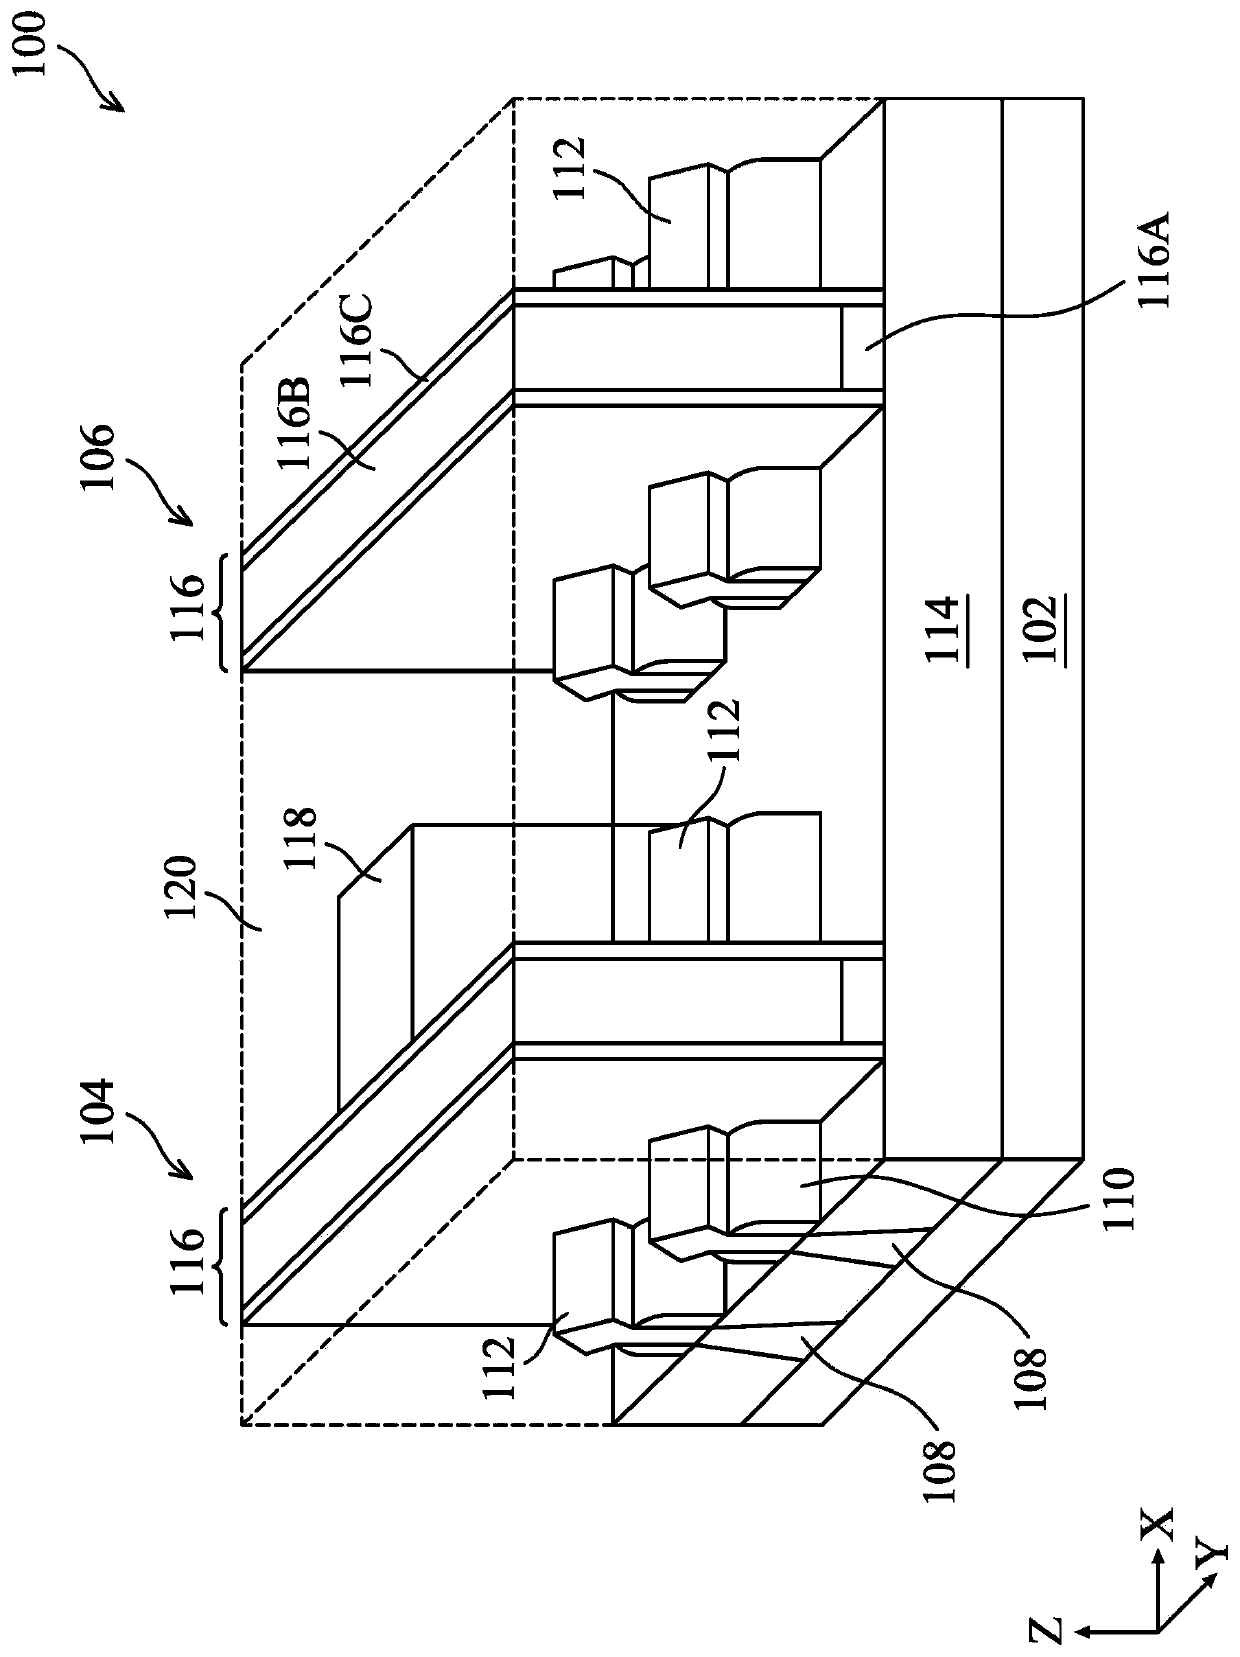 Semiconductor Structure with Material Modification and Low Resistance Plug